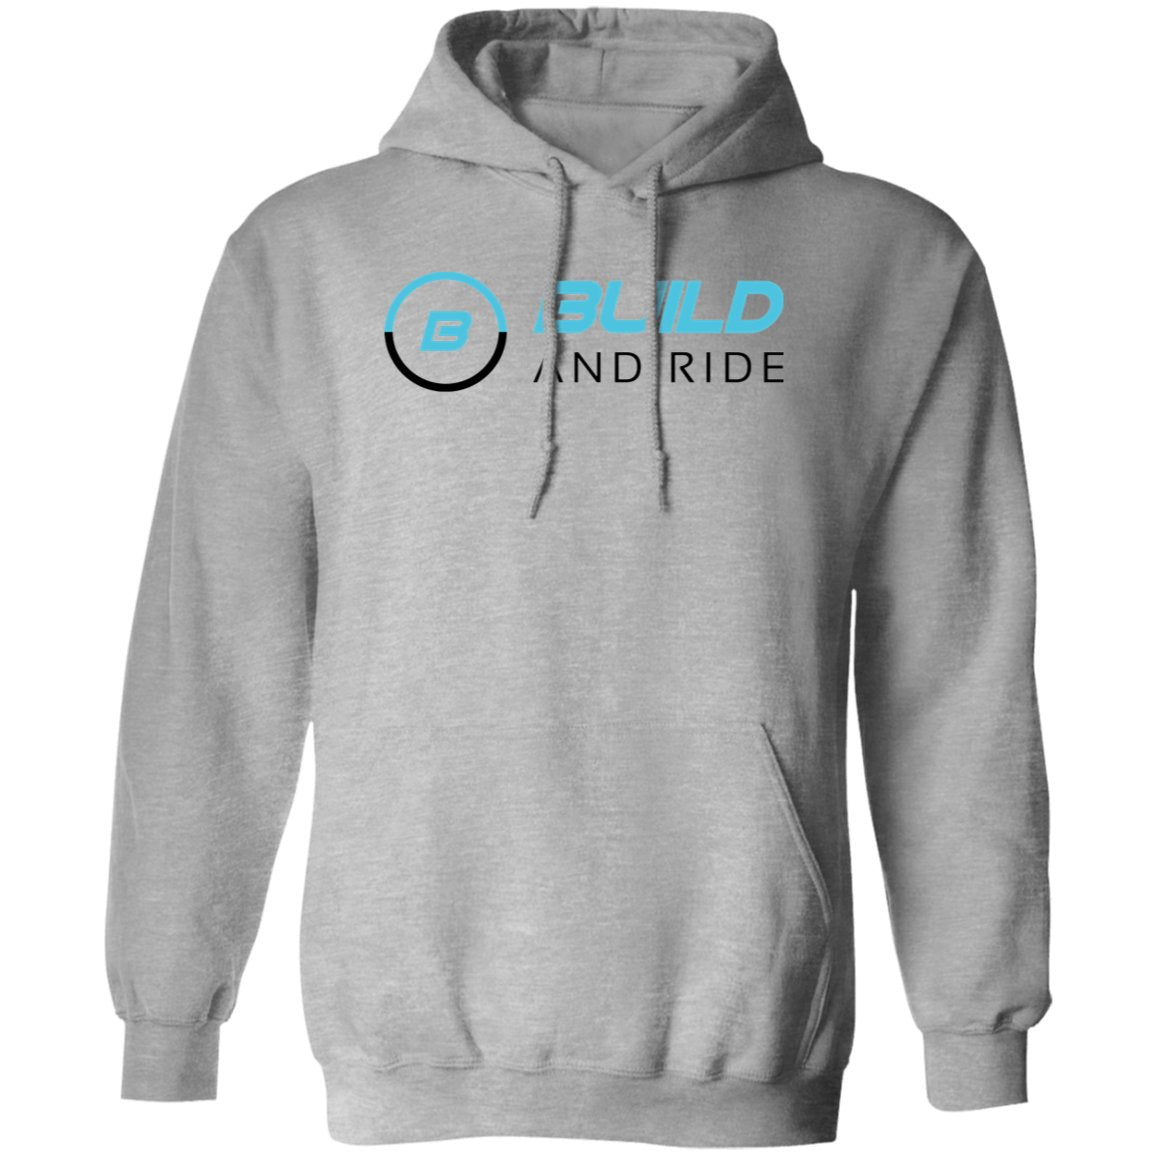 Build And Ride Hoodie - Build And Ride